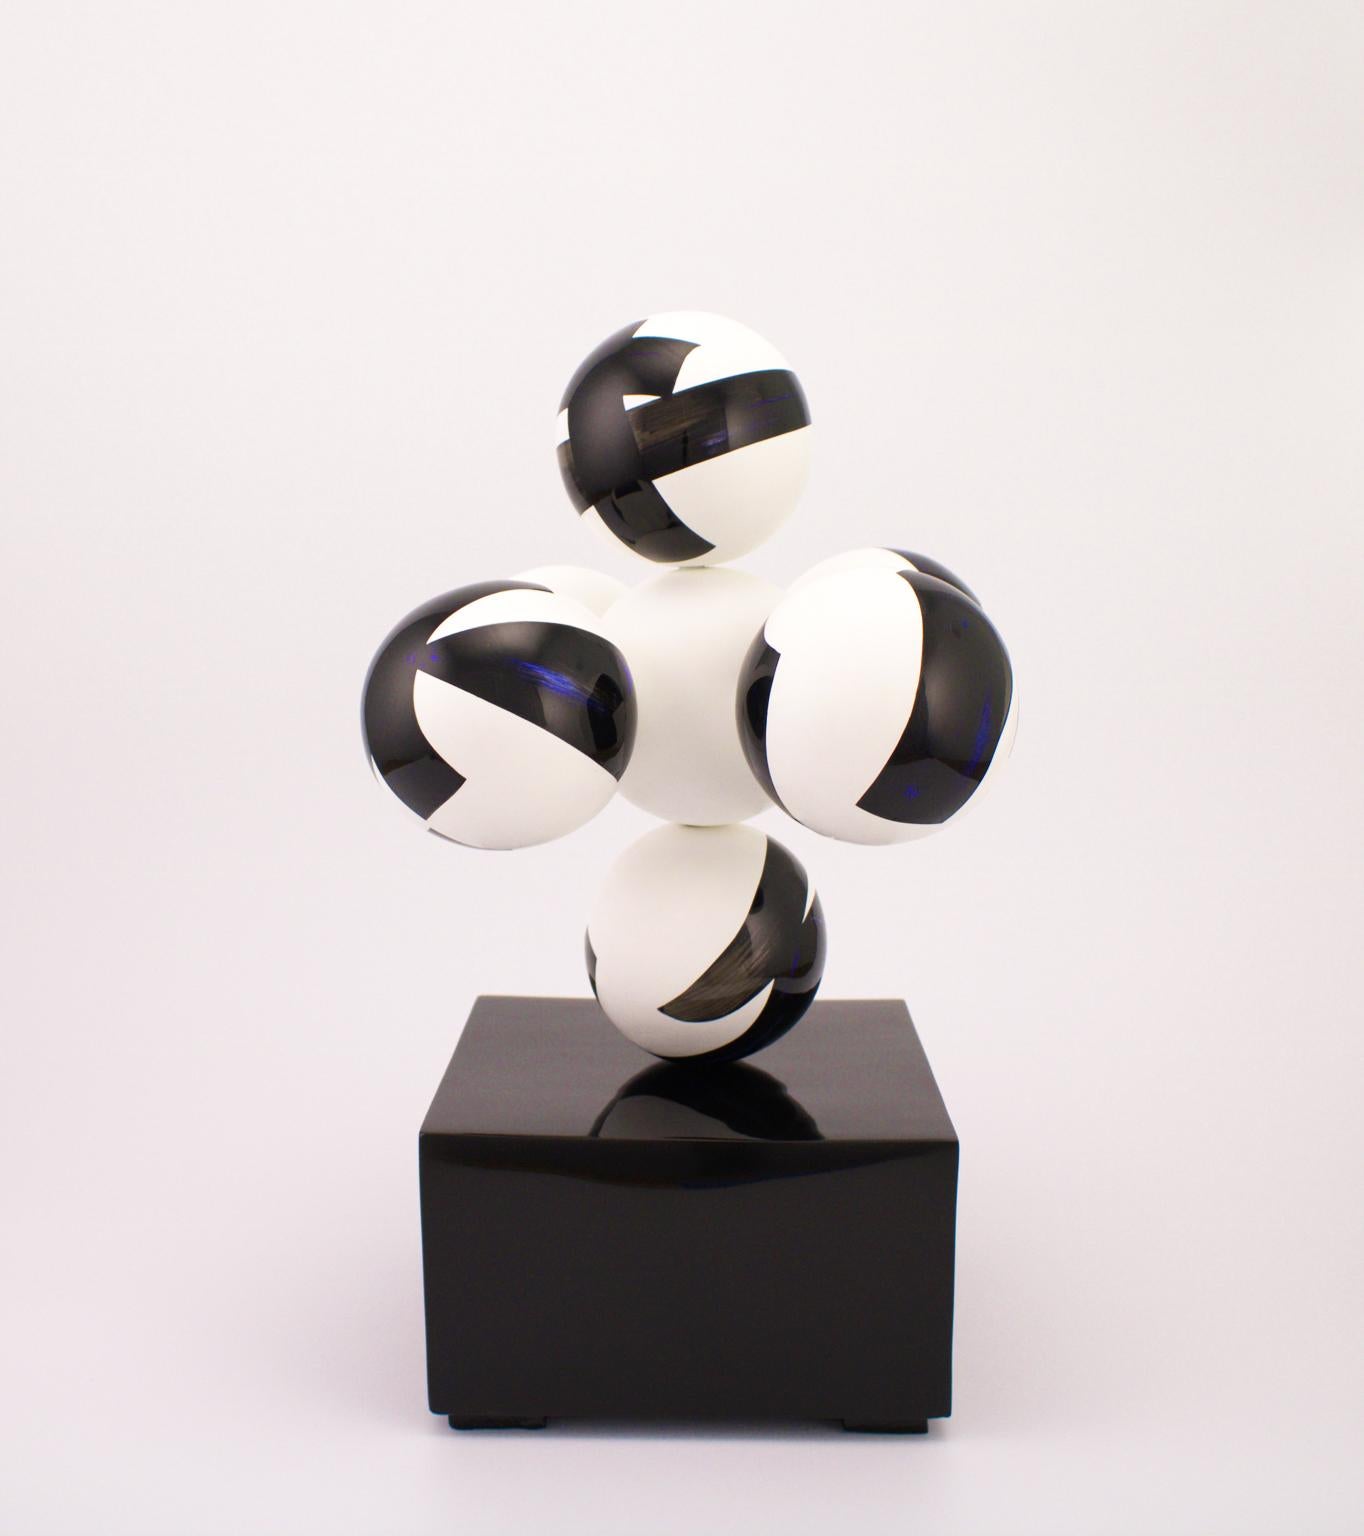 Sculpture in lacquered ceramics by Golem, seven white spheres with black and ultramarine blue decorations mounted in a criss cross pattern, black rectangular lacquered base. The white portions are opaque while all others are glossy to enhance